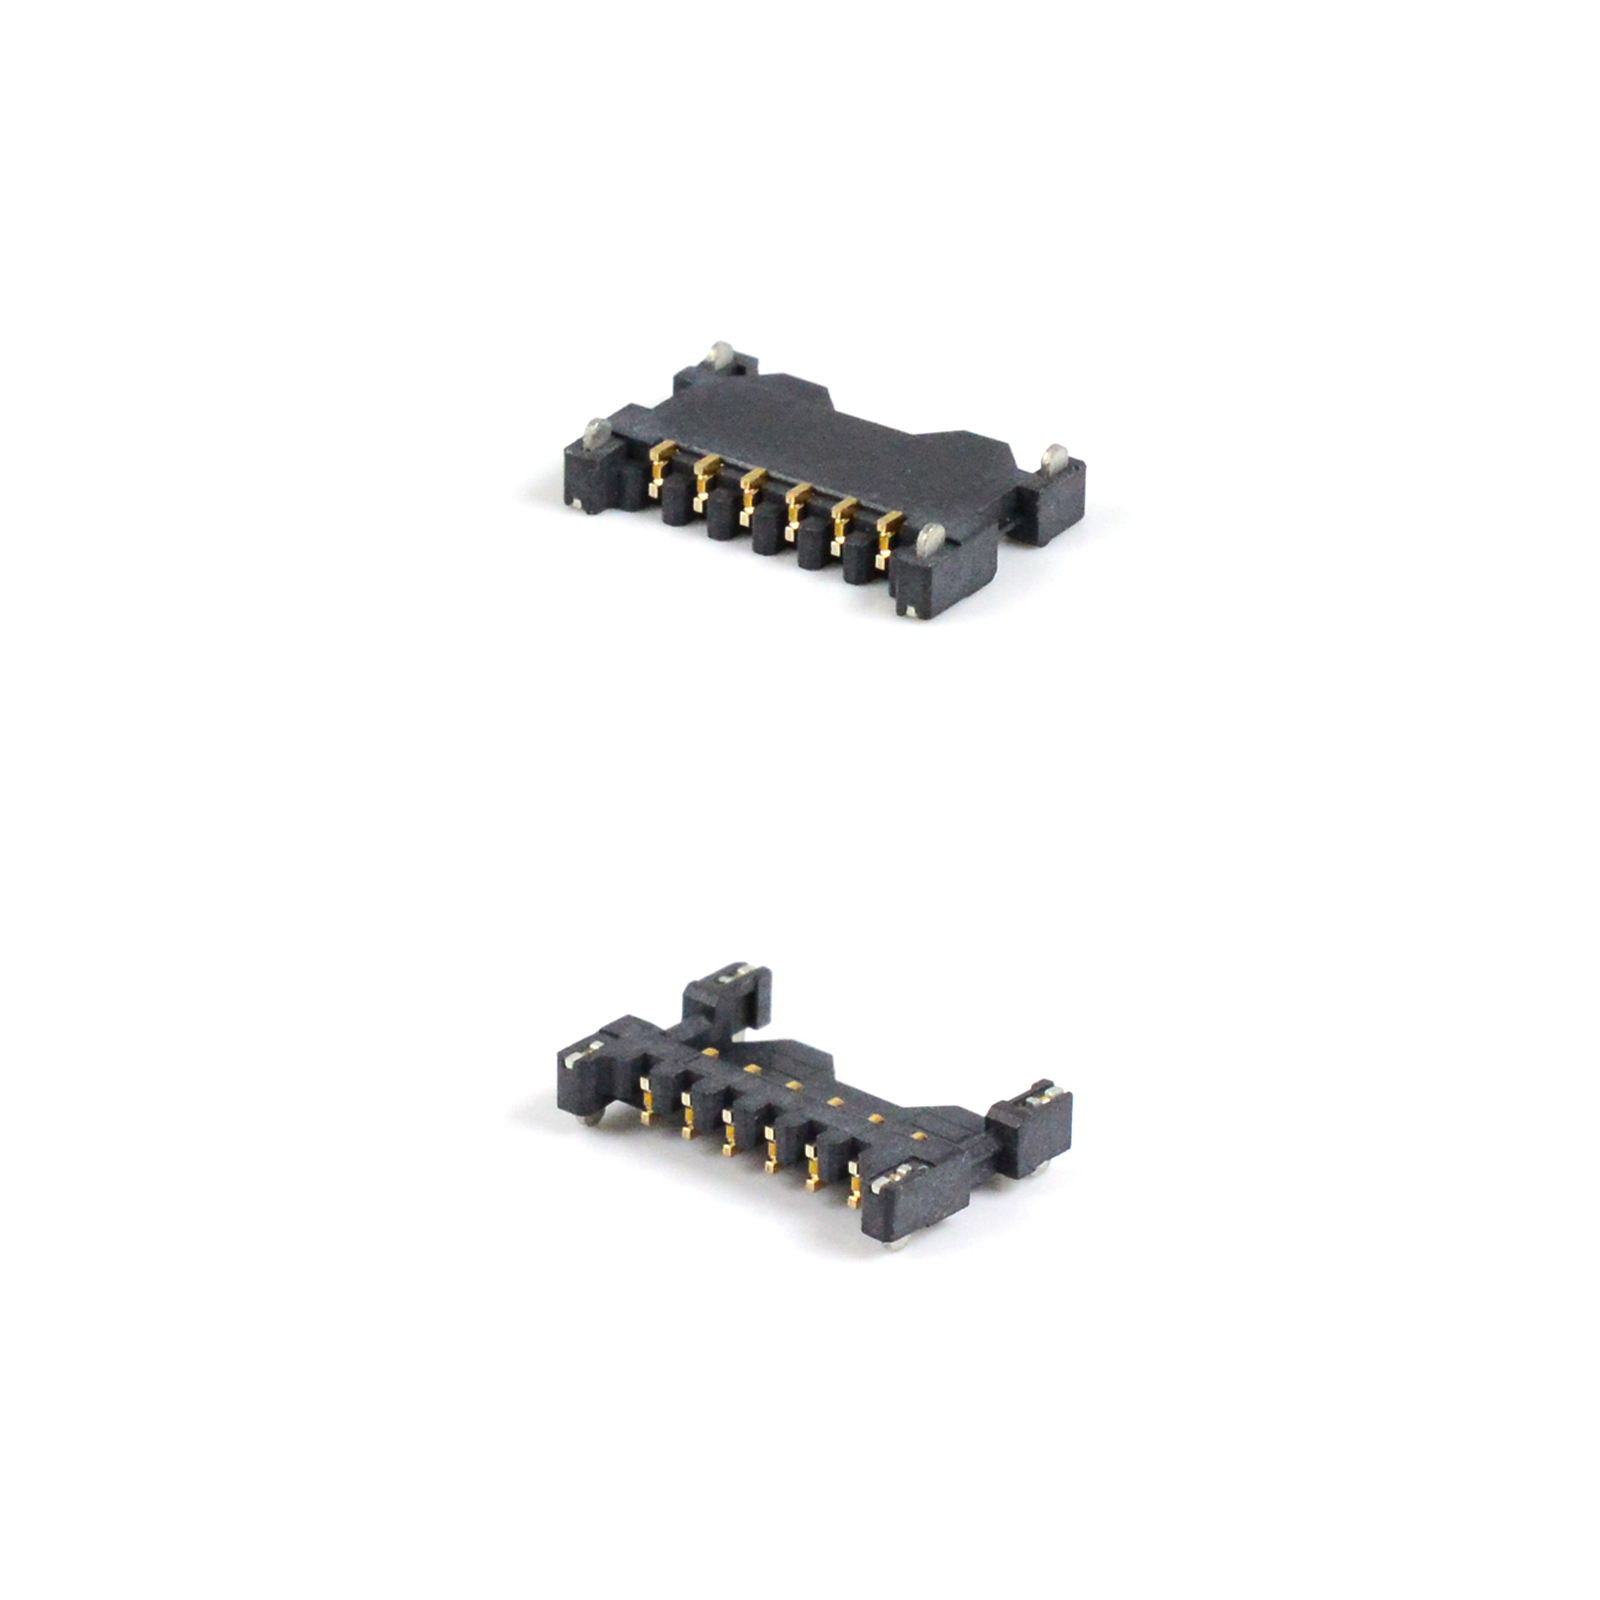 Galaxy Tab 3 8.0 Batterie FPC Connector